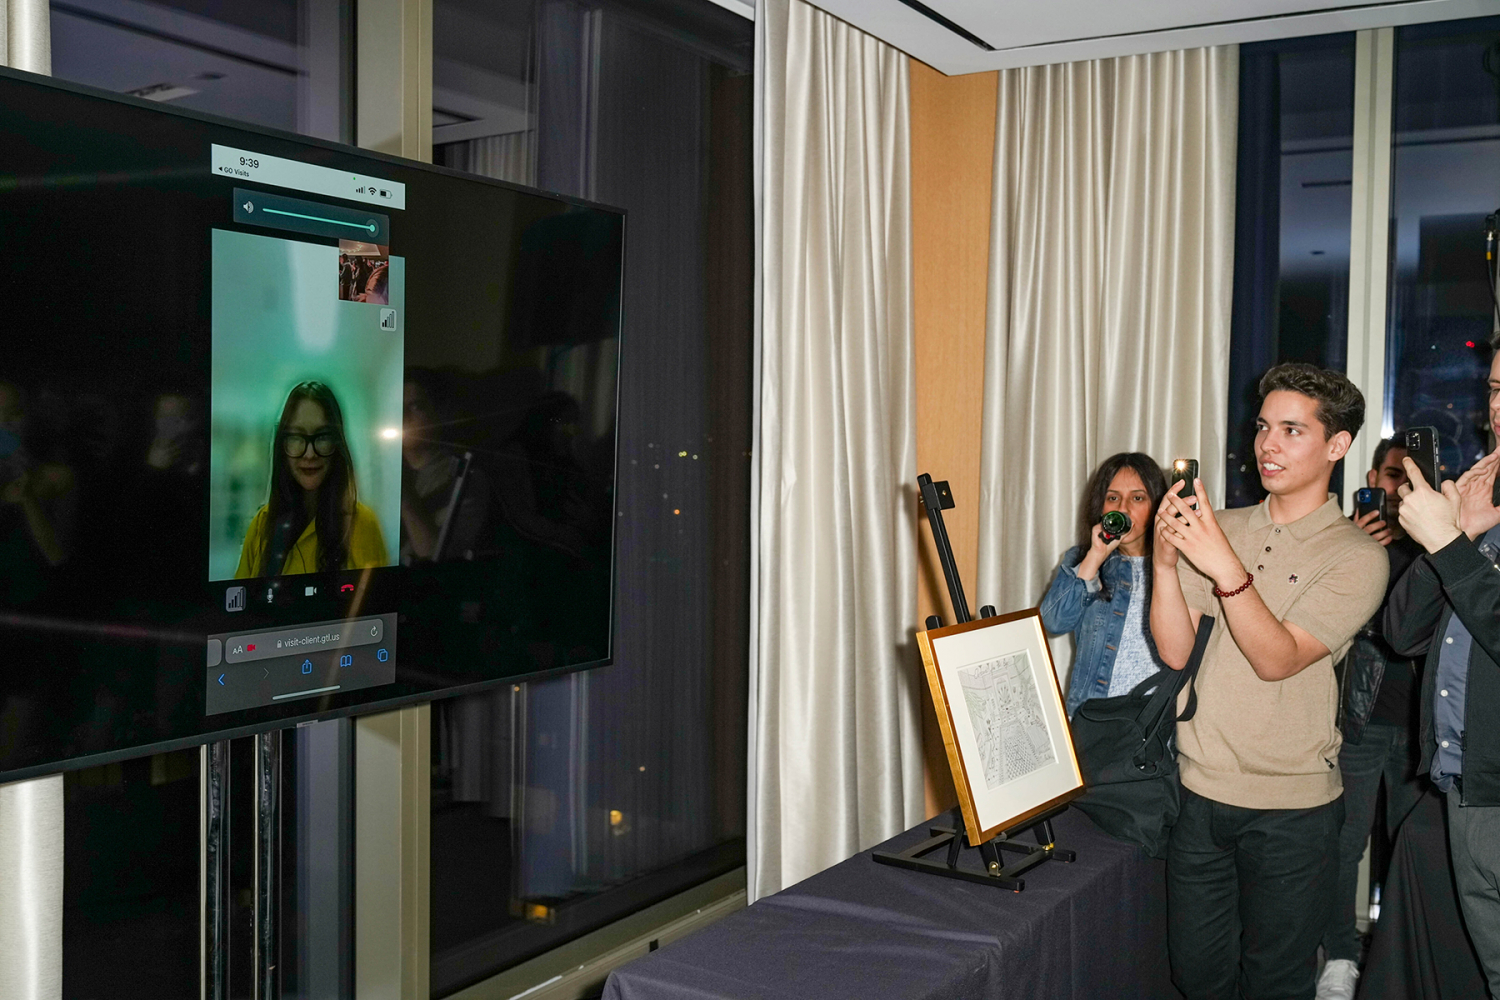 Photo by: John Nacion/STAR MAX/IPx 2022 5/19/22 Anna Sorokin (aka Anna Delvey) launched her solo art exhibit titled, "Allegedly" at the Public Hotel in New York City on May 19, 2022. She surprised her friends and fans by appearing in a video call from an ICE detention facility in Upstate New York wearing a yellow jumpsuit.